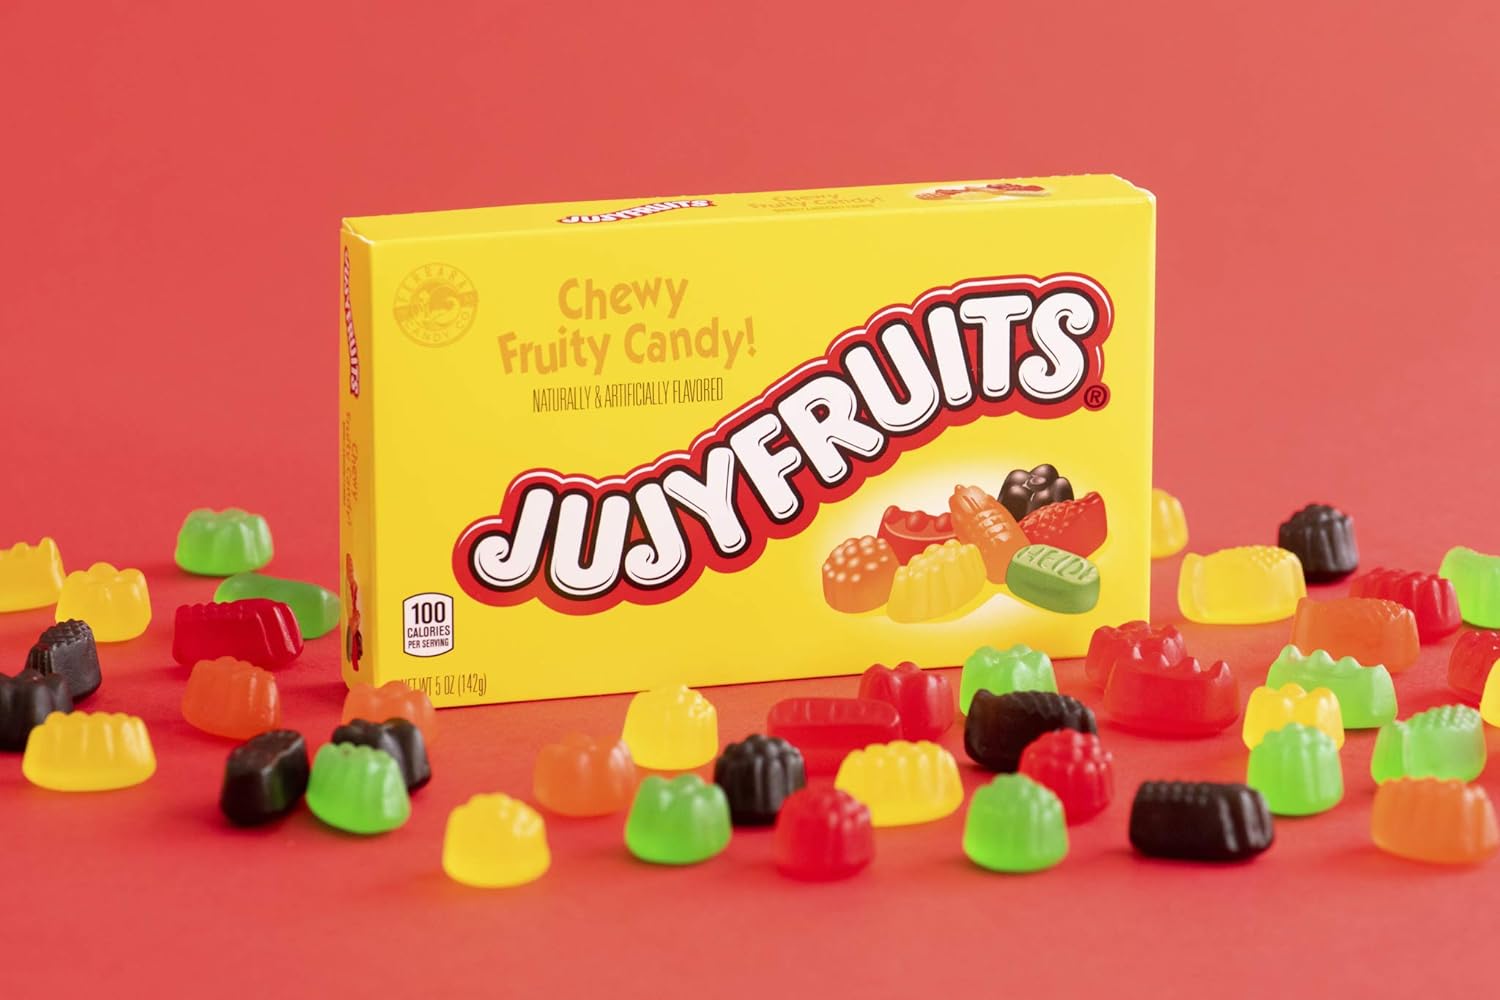  Jujyfruits Candy, 5 Ounce Theater Box, Pack of 12